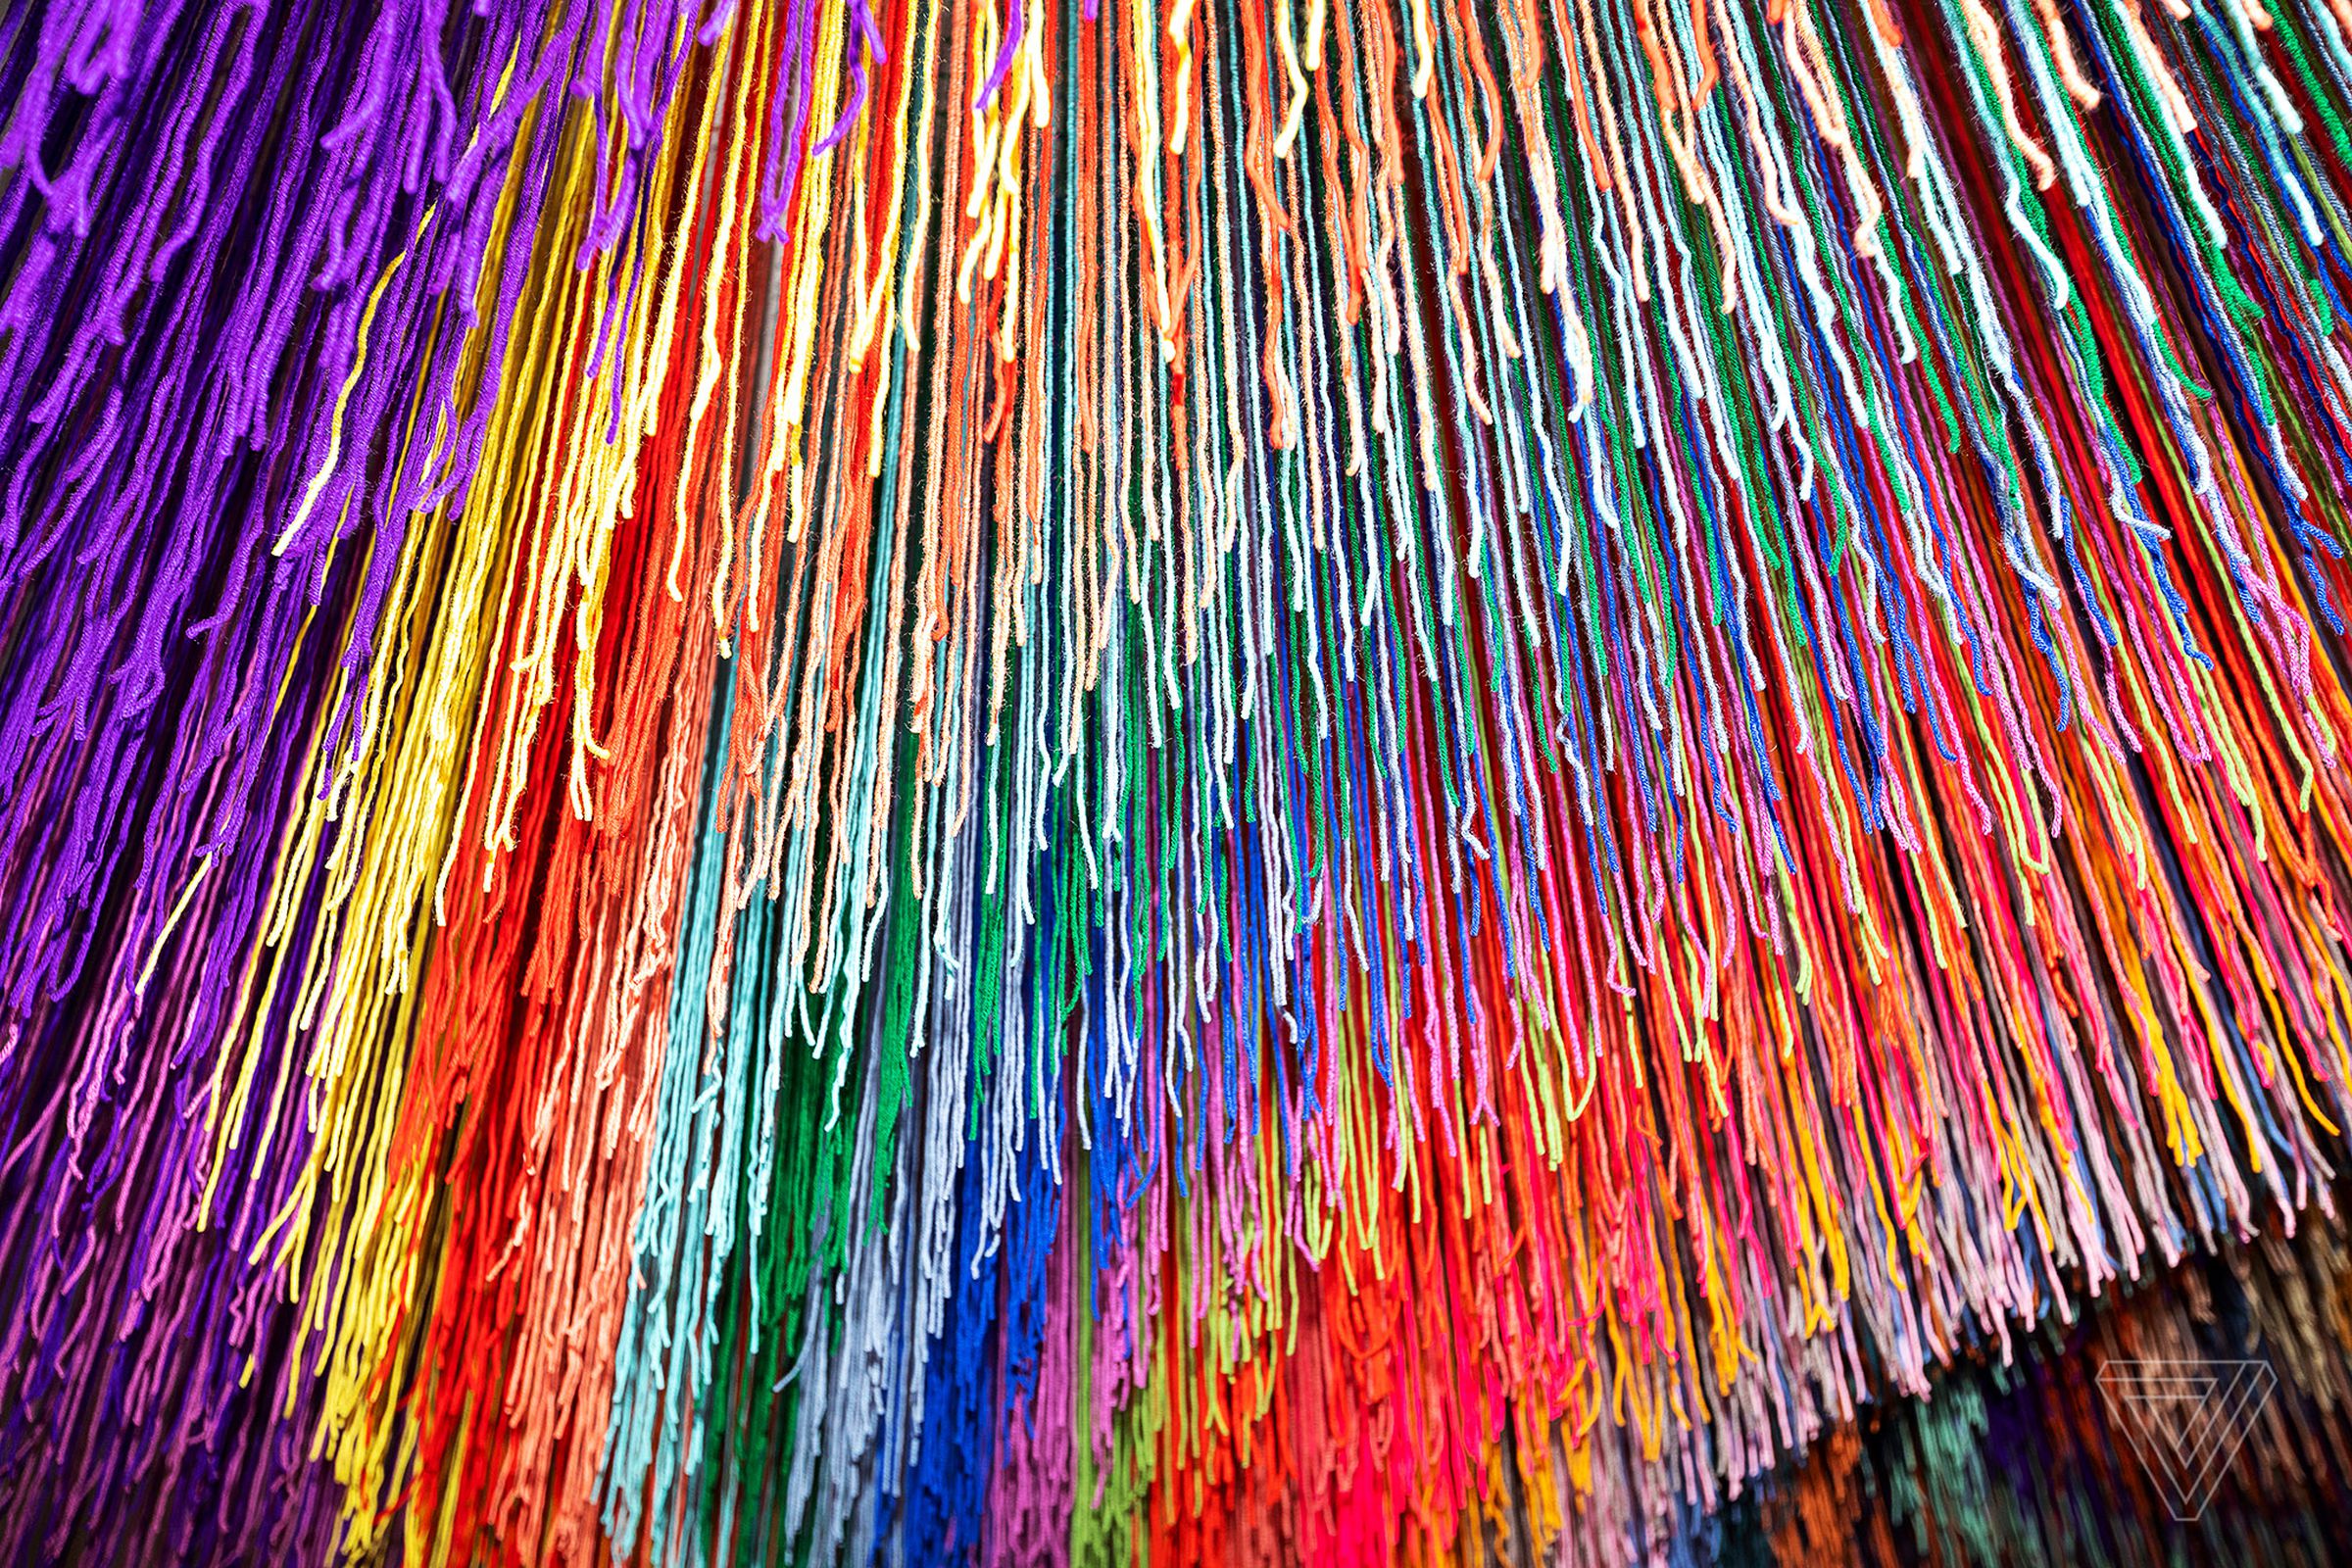 Detail of “Thirty” by HOTTEA, which is installed in the lobby of Color Factory’s Houston location.